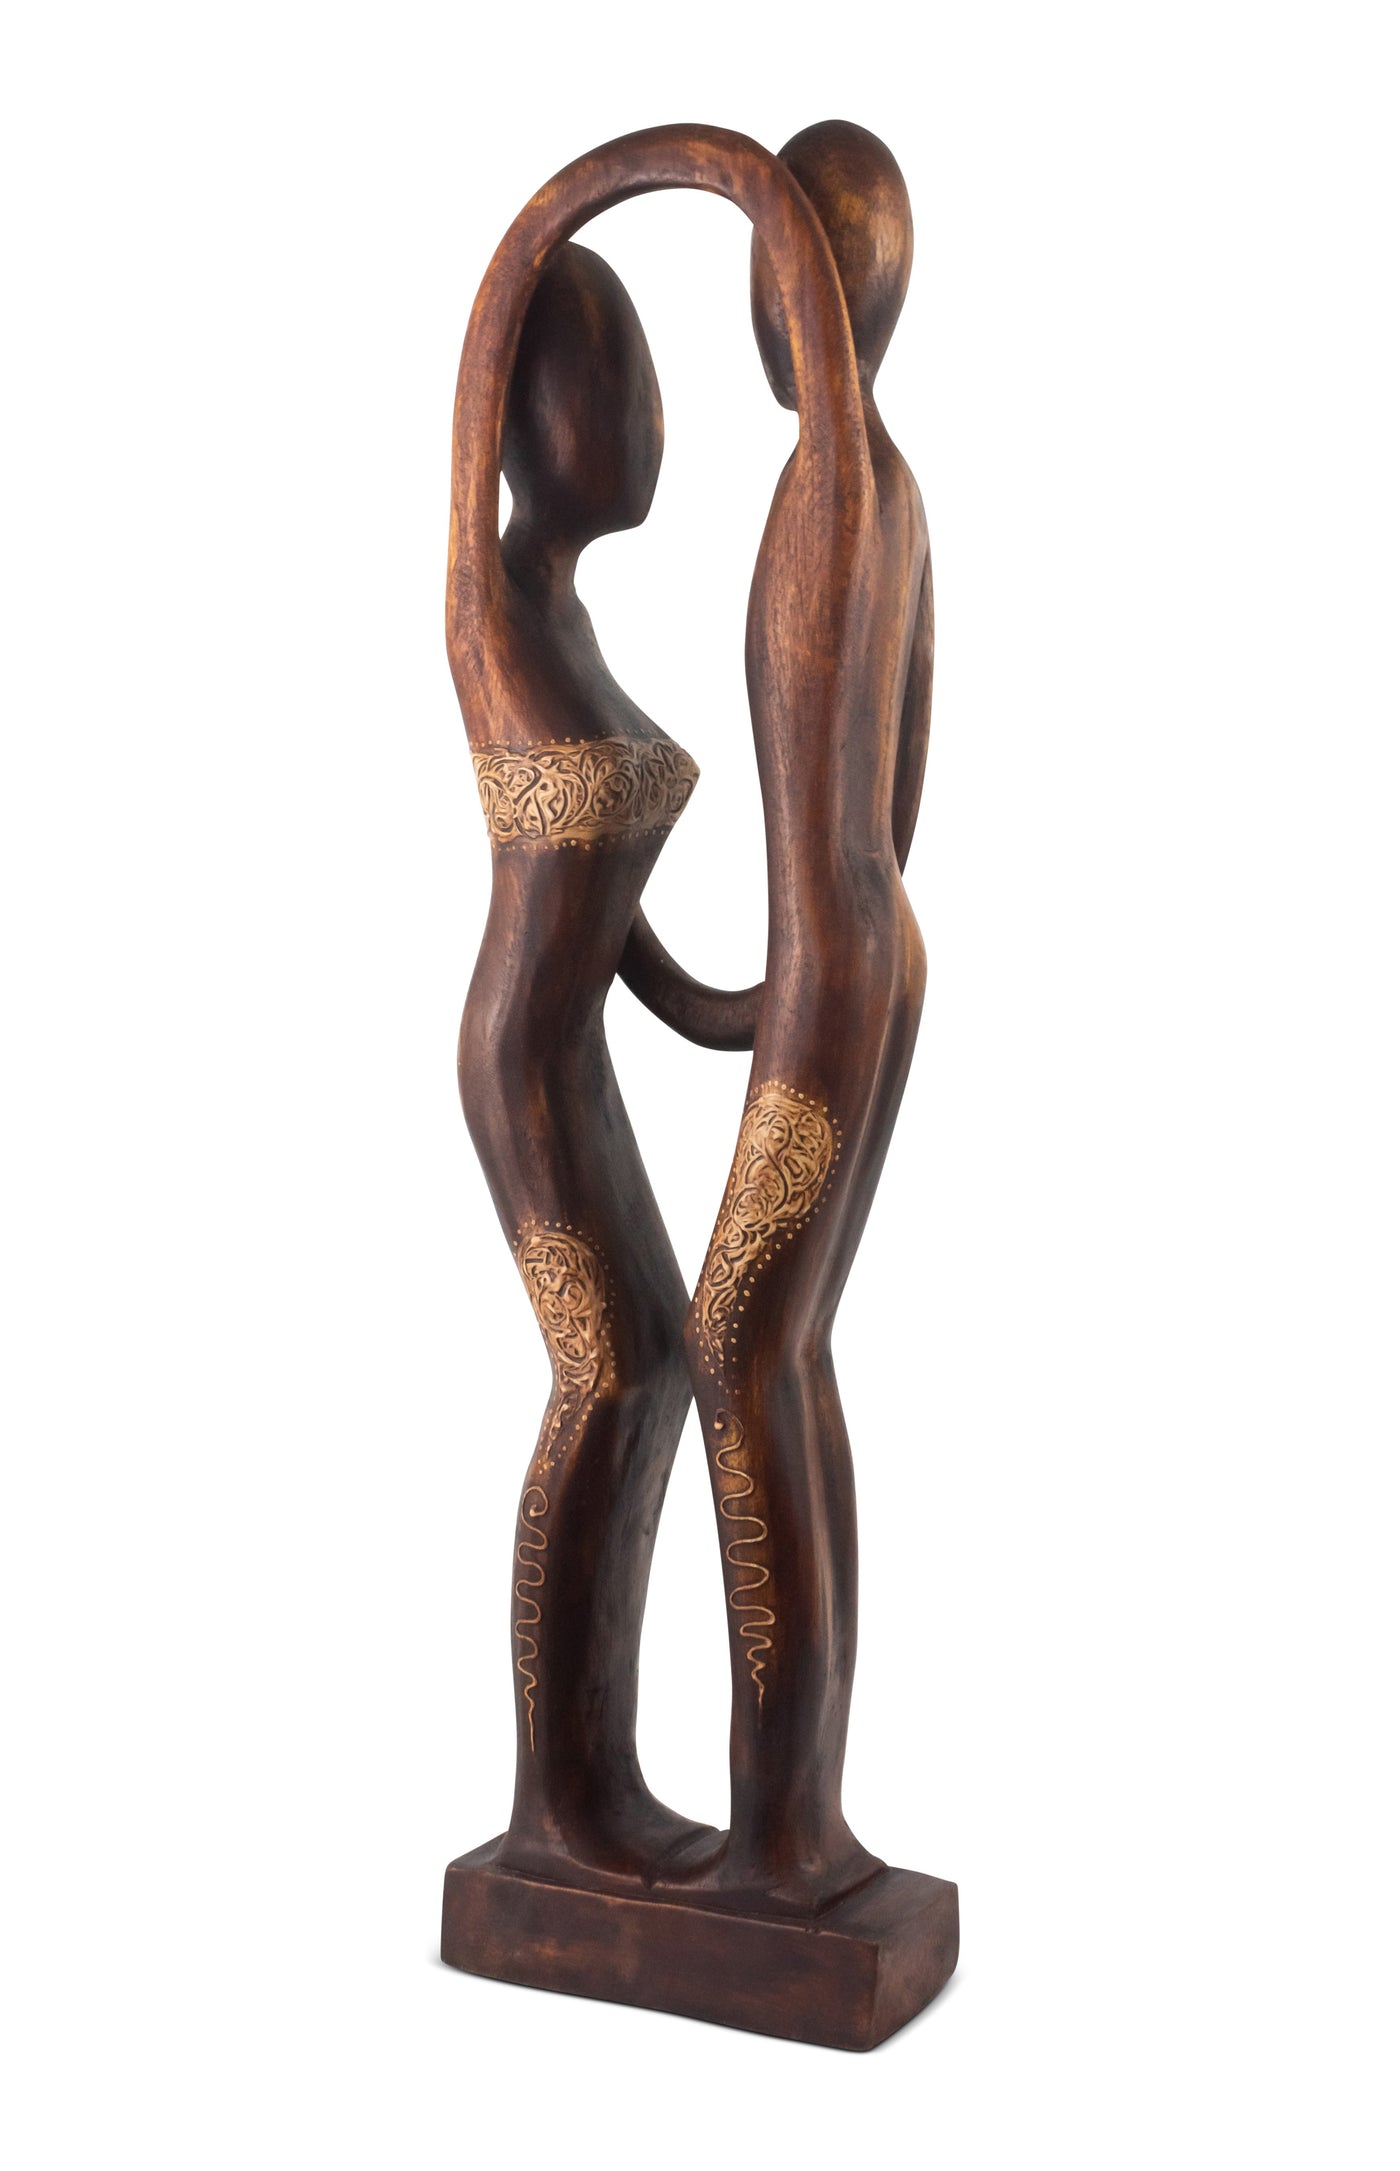 24" Wooden Handmade Couple African Dancing Sculpture Statue Handcrafted Gift Art Decorative Home Decor Figurine Accent Decoration Artwork Hand Carved